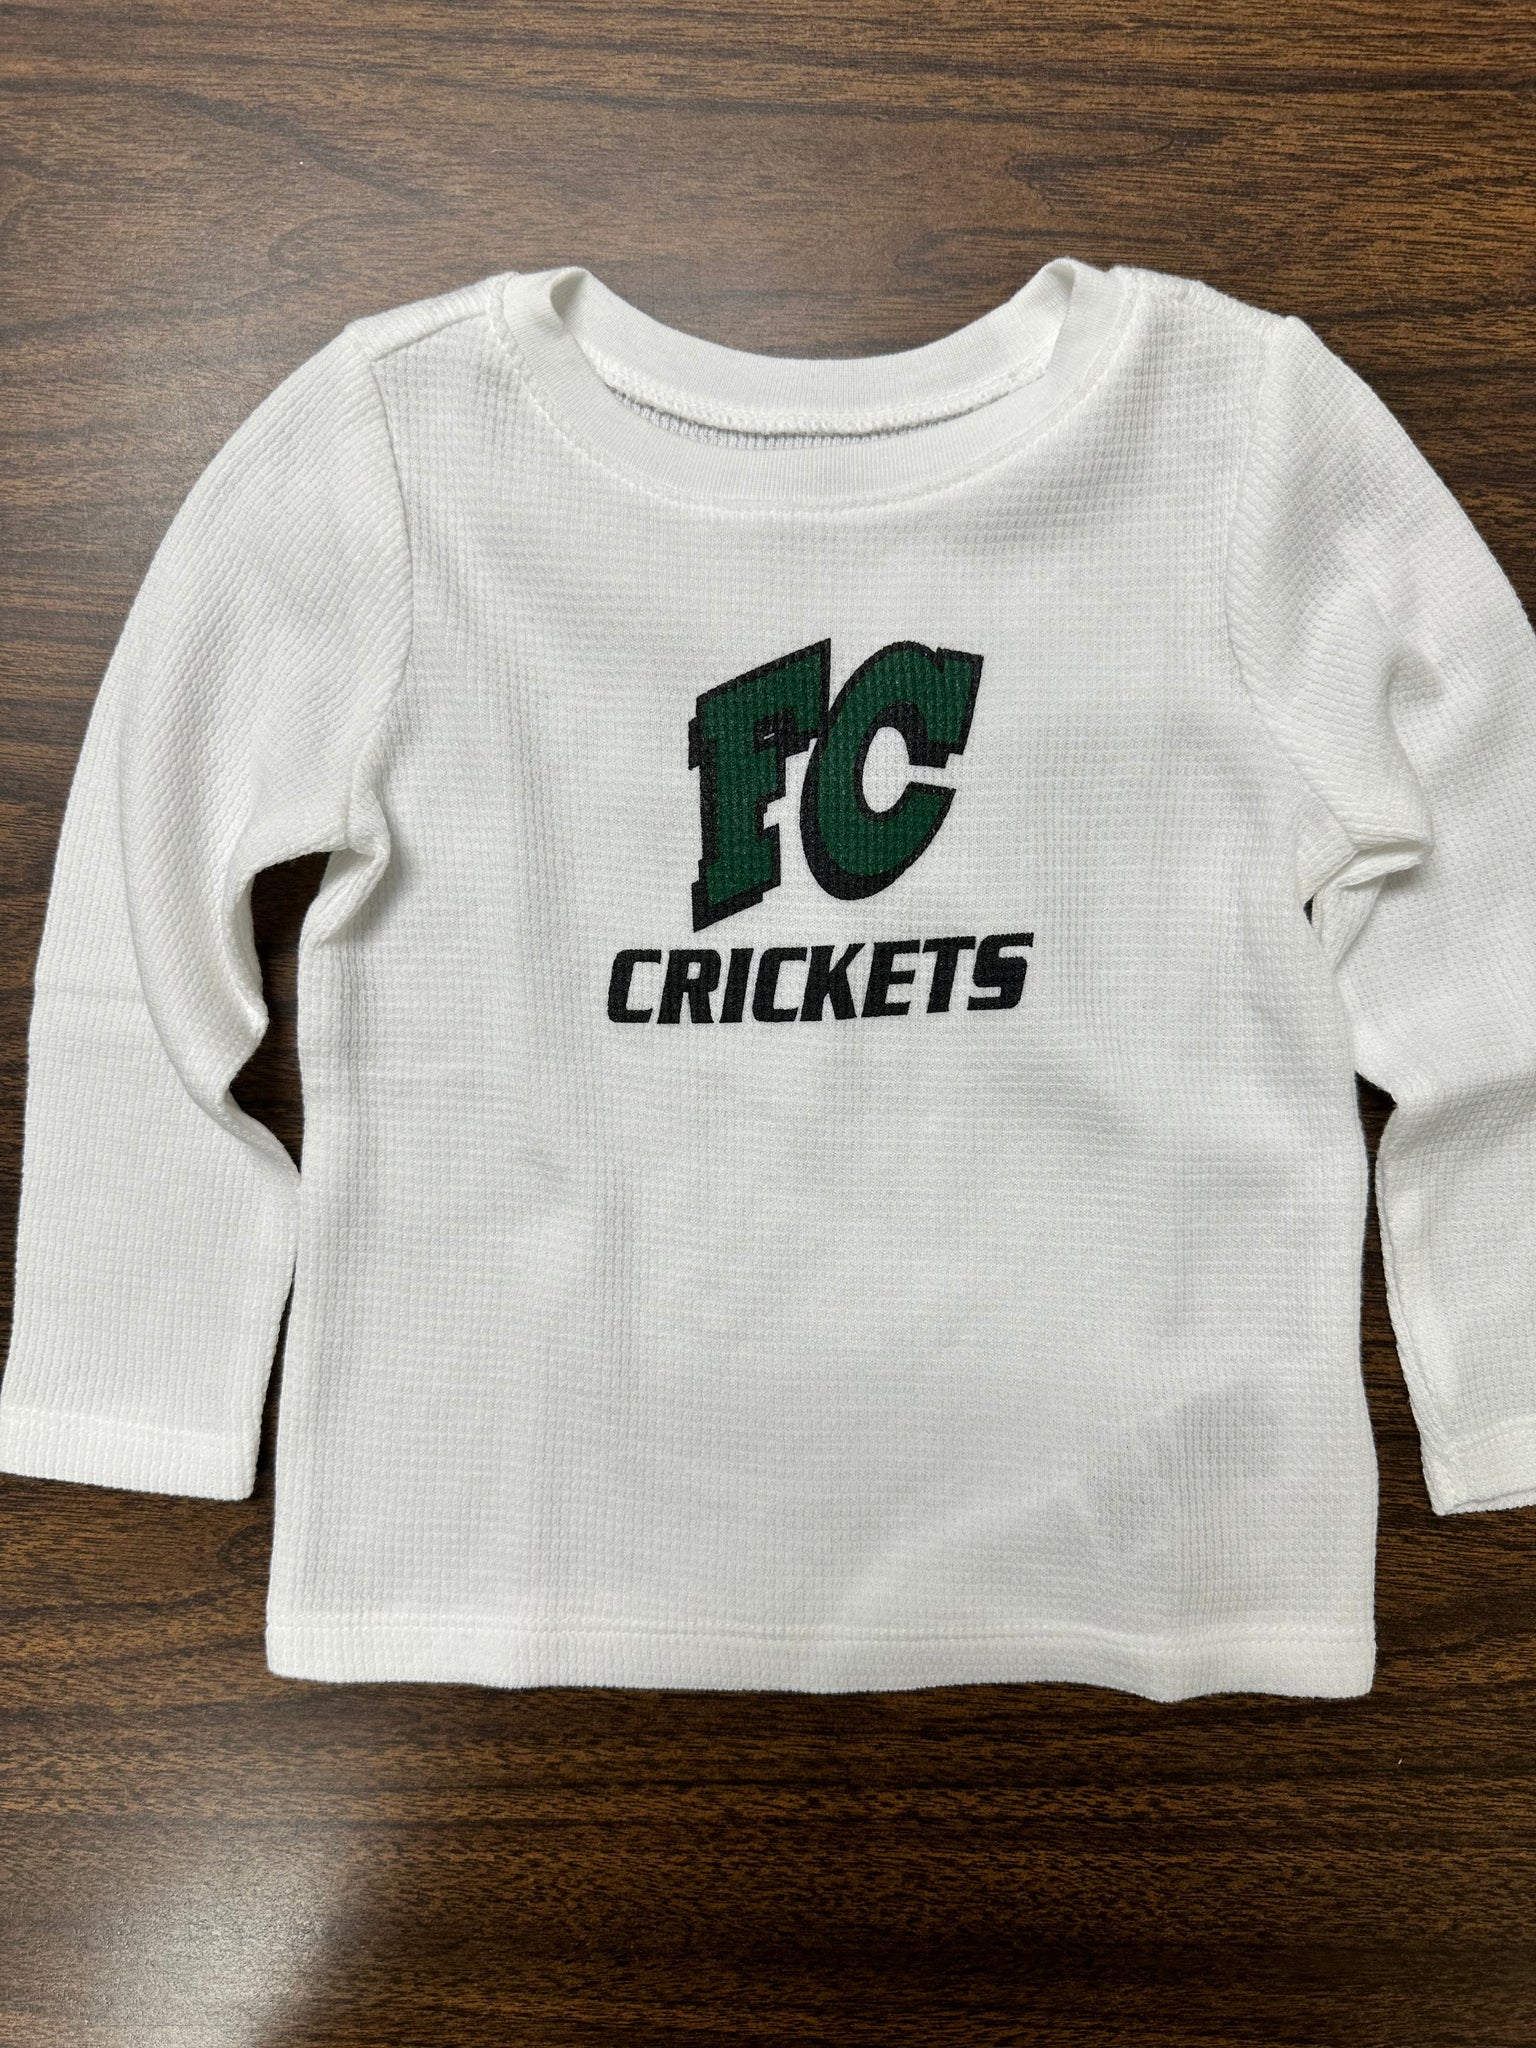 Toddler Unisex FC Crickets White Thermal-Knit Waffle LS